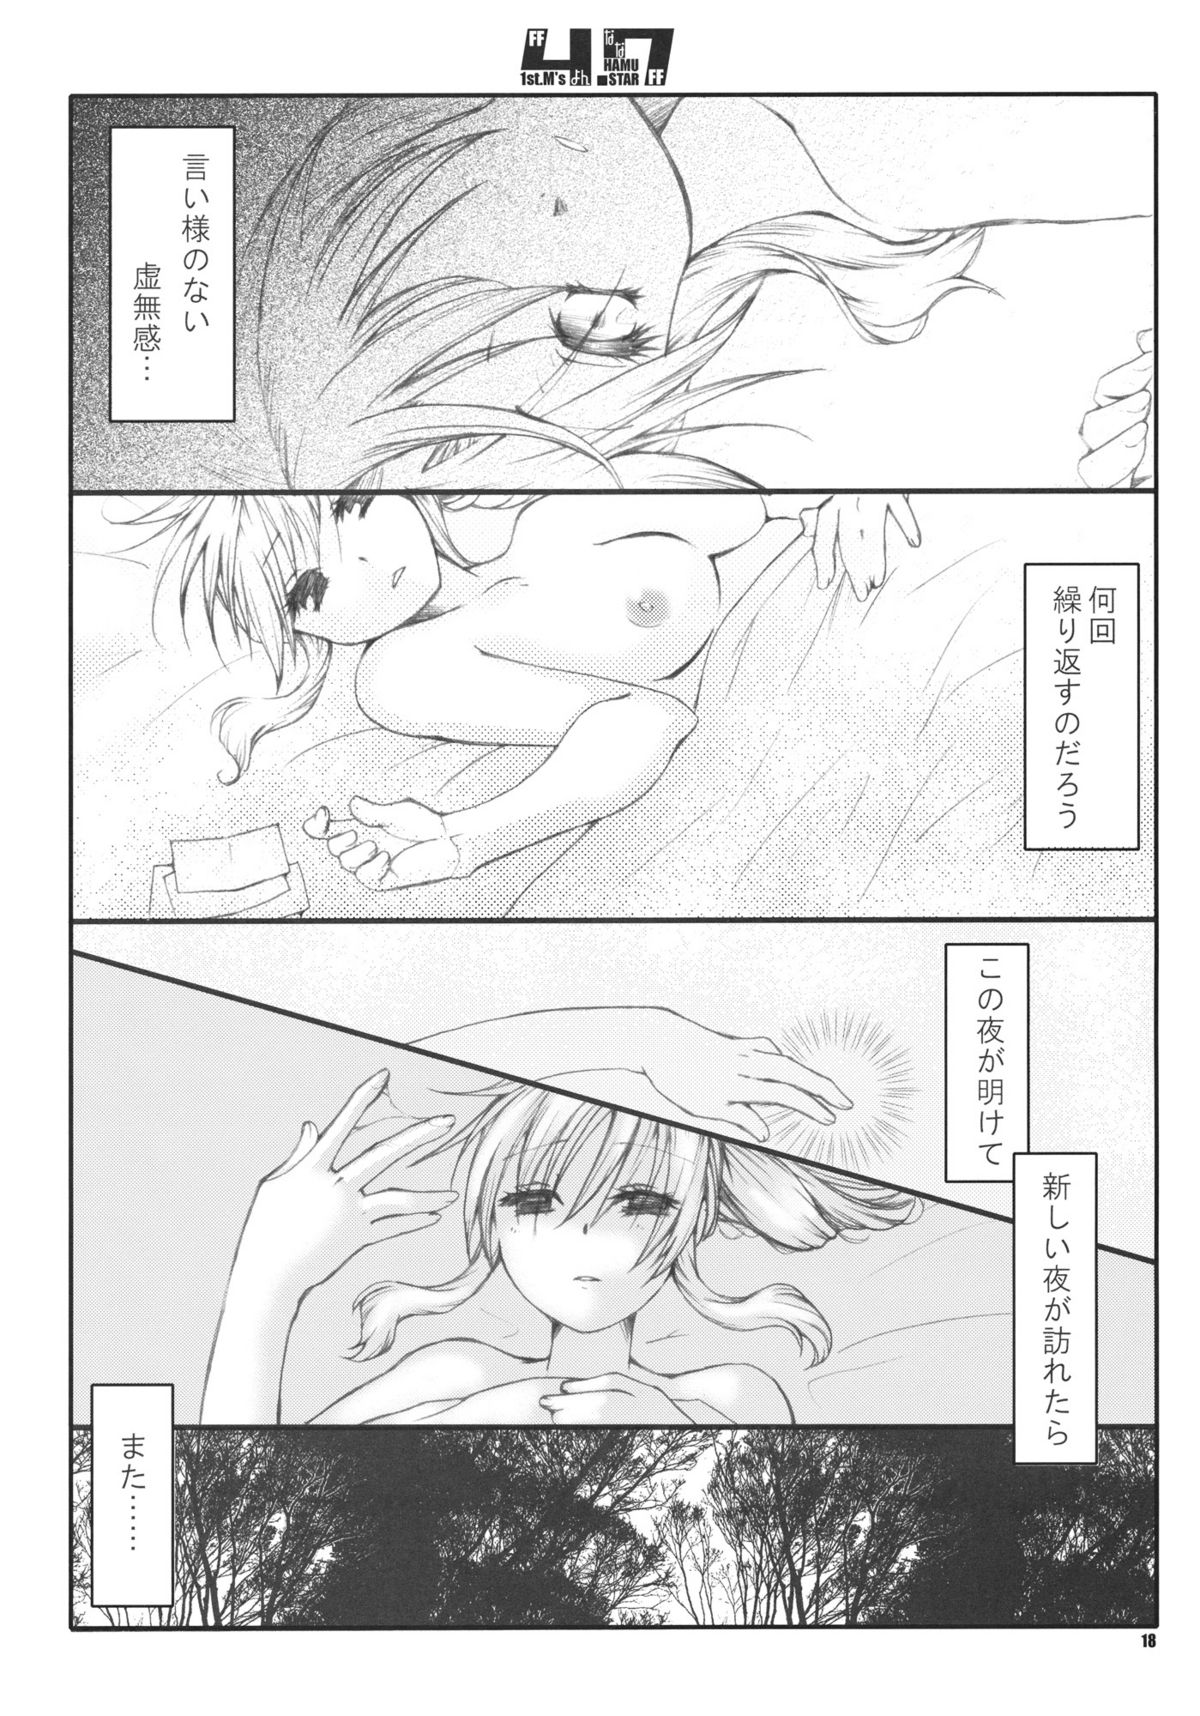 (C80) [1st.M's] 4.7 (Final Fantasy) page 18 full